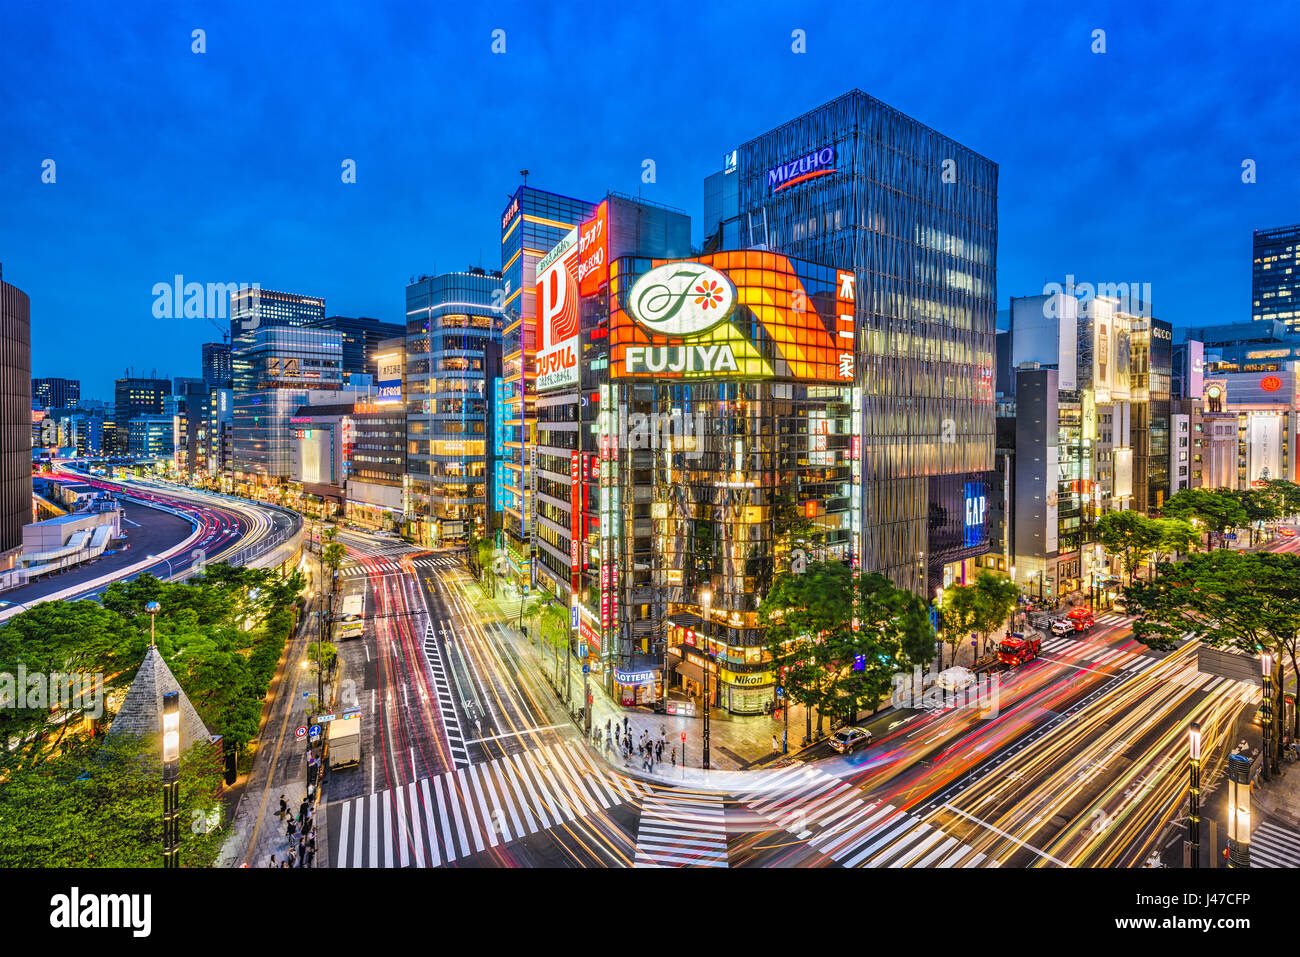 TOKYO, JAPAN - MAY 9, 2017: The Ginza district at night. Ginza is a popular upscale shopping area of Tokyo. Stock Photo